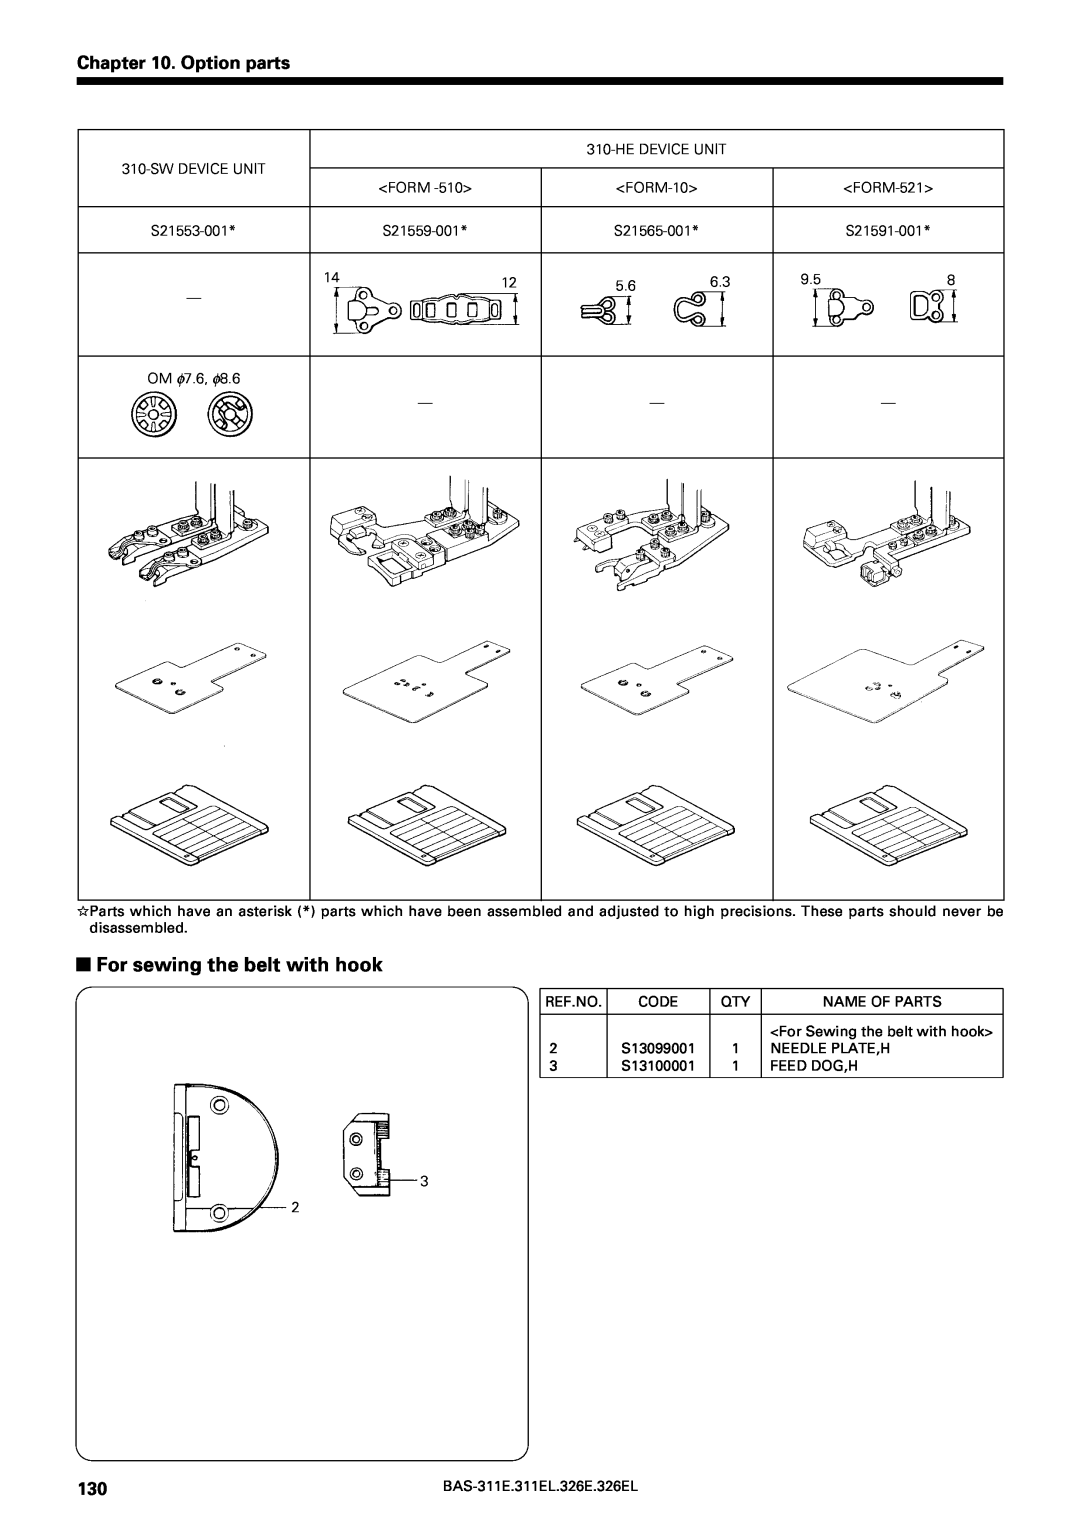 Brother BAS-311E service manual For sewing the belt with hook, Option parts 